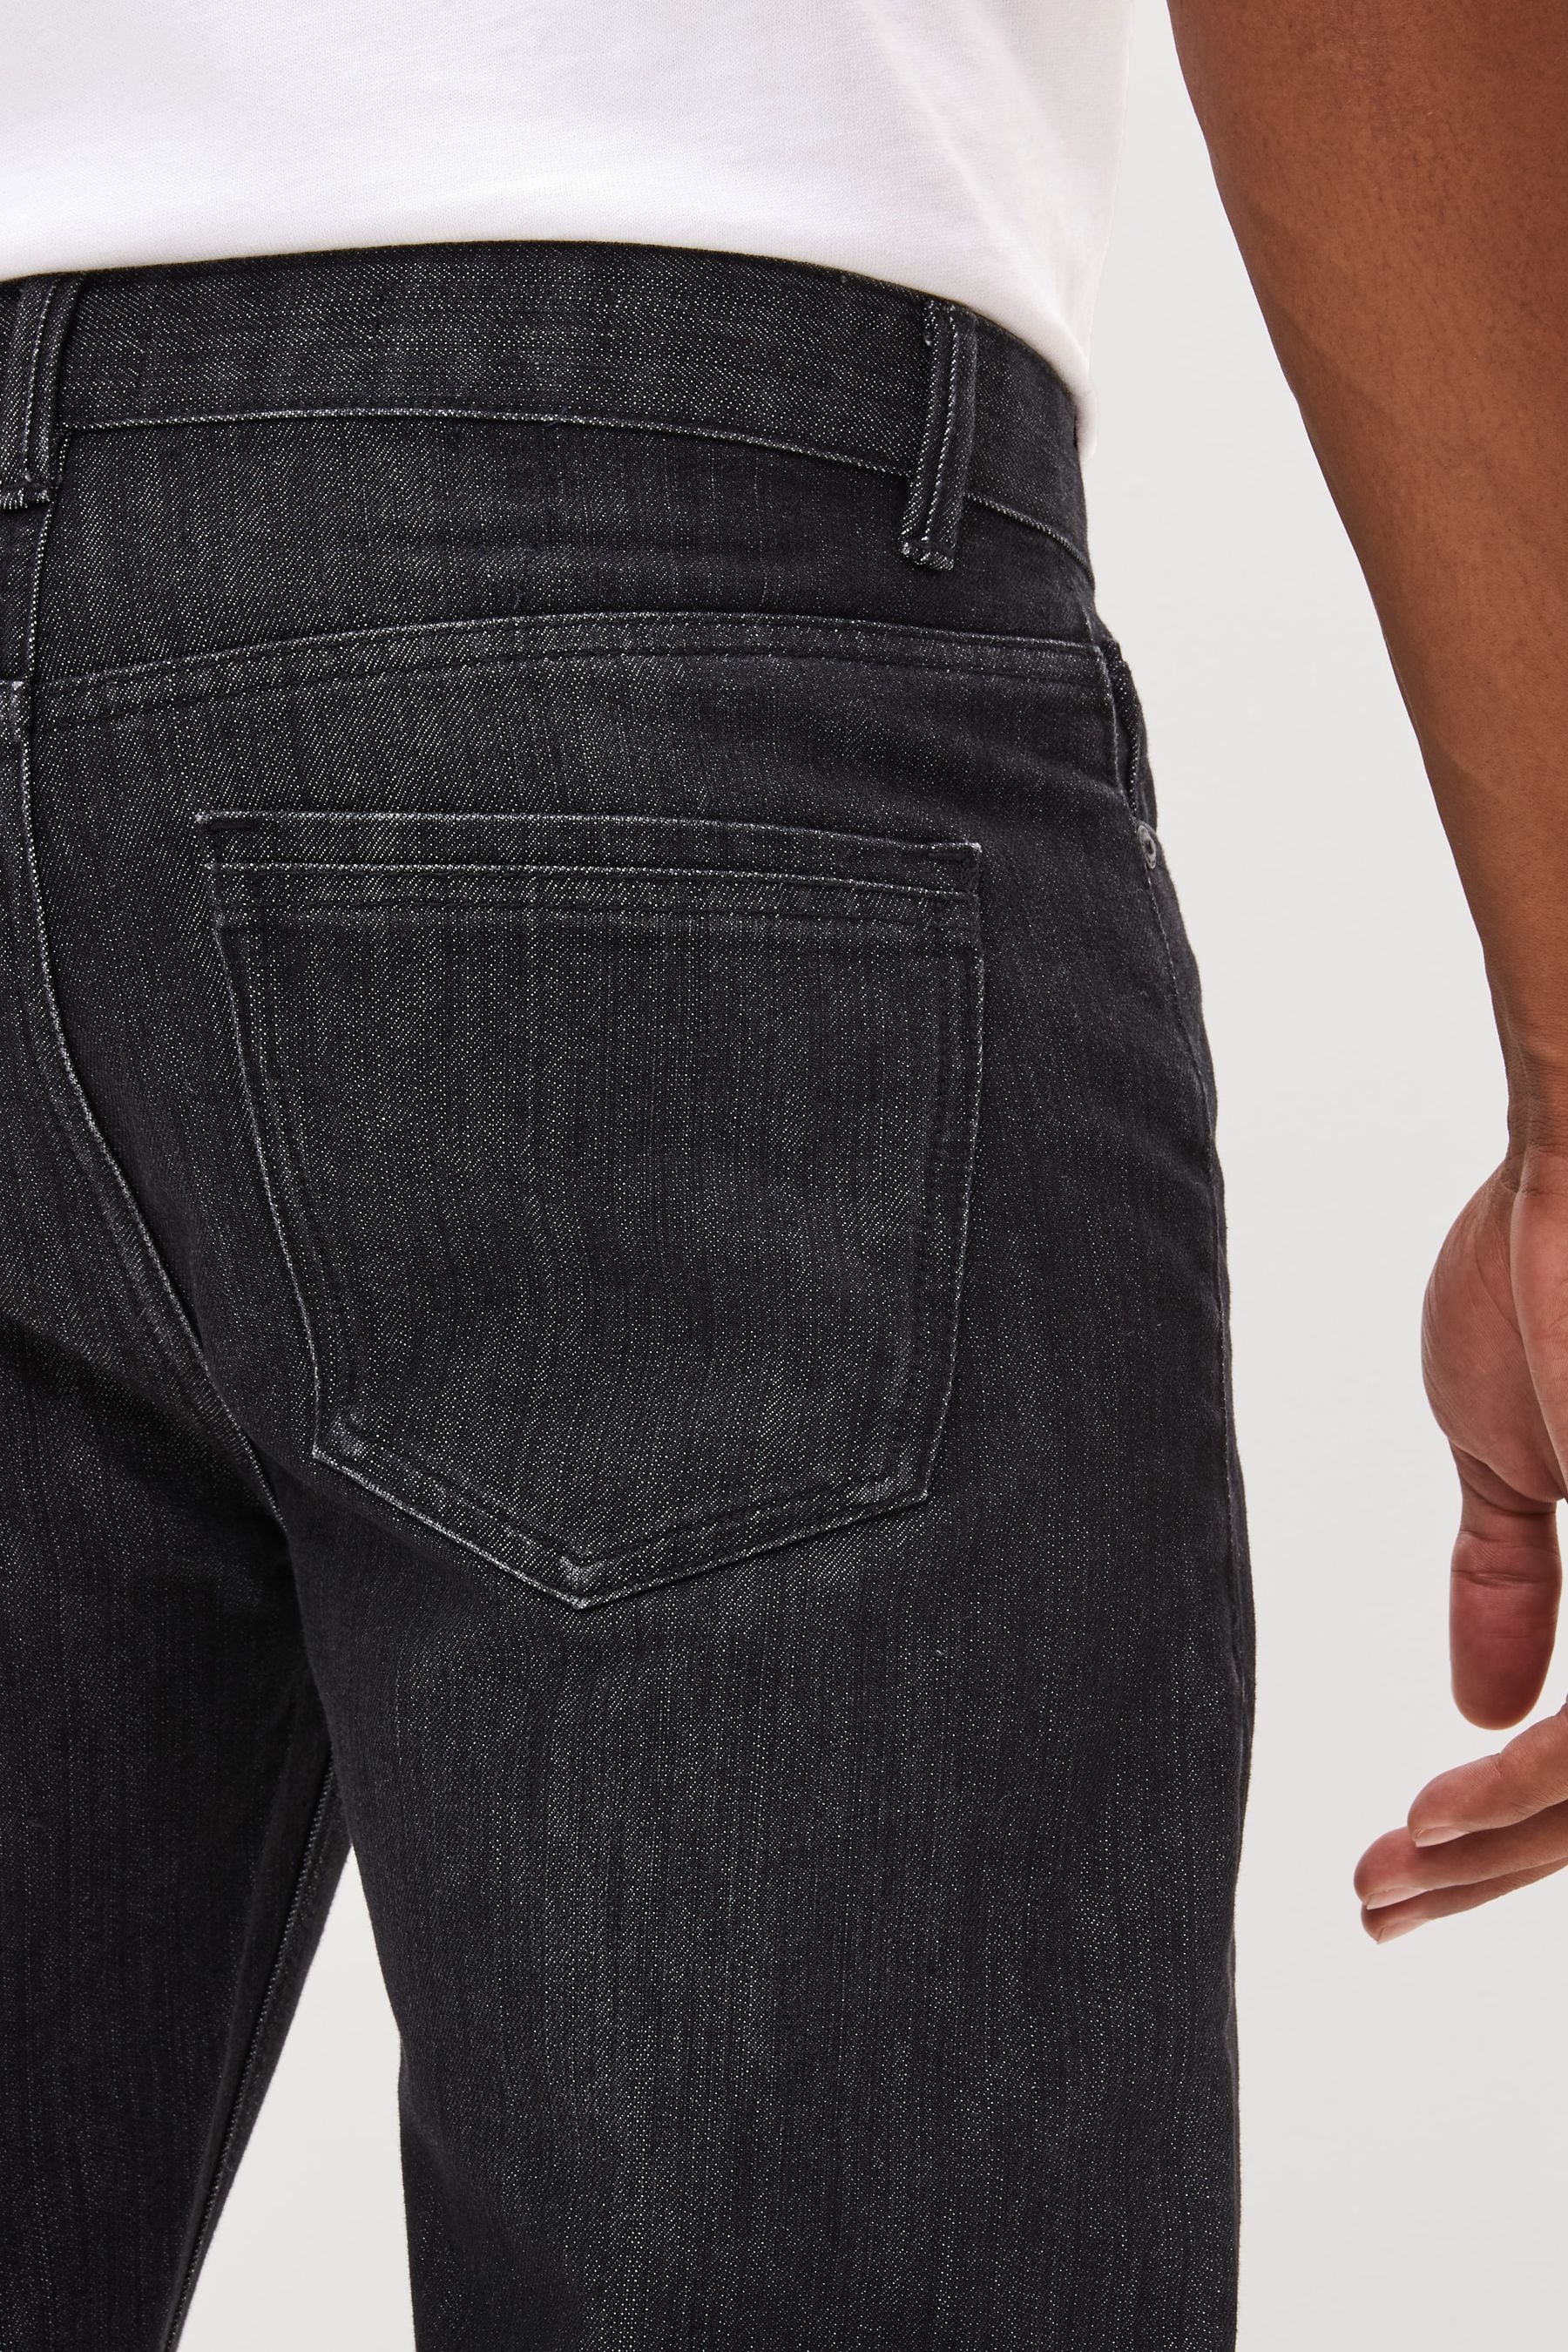 Buy Cotton Straight Fit Jeans from the Next UK online shop